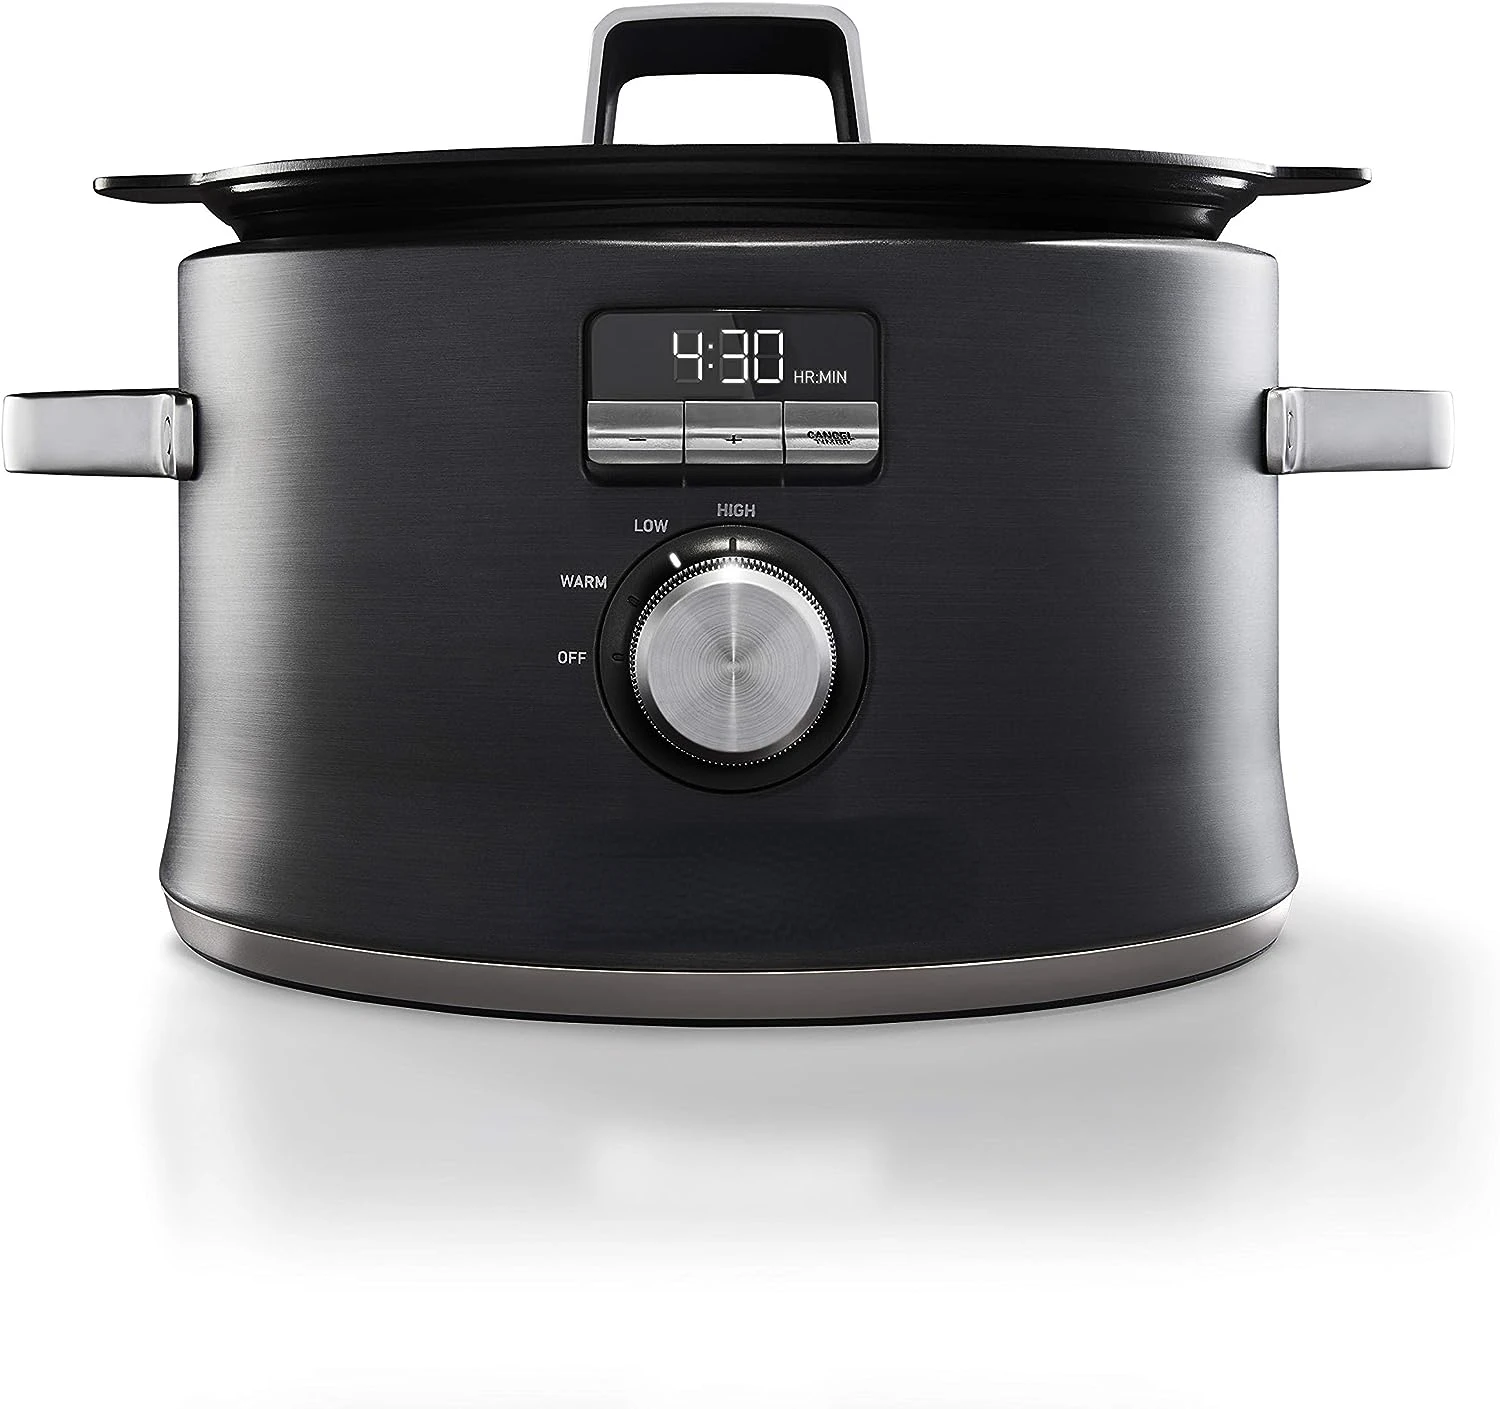 

Cooker with Digital Timer and Programmable Controls, 5.3 Quarts, Stainless Steel